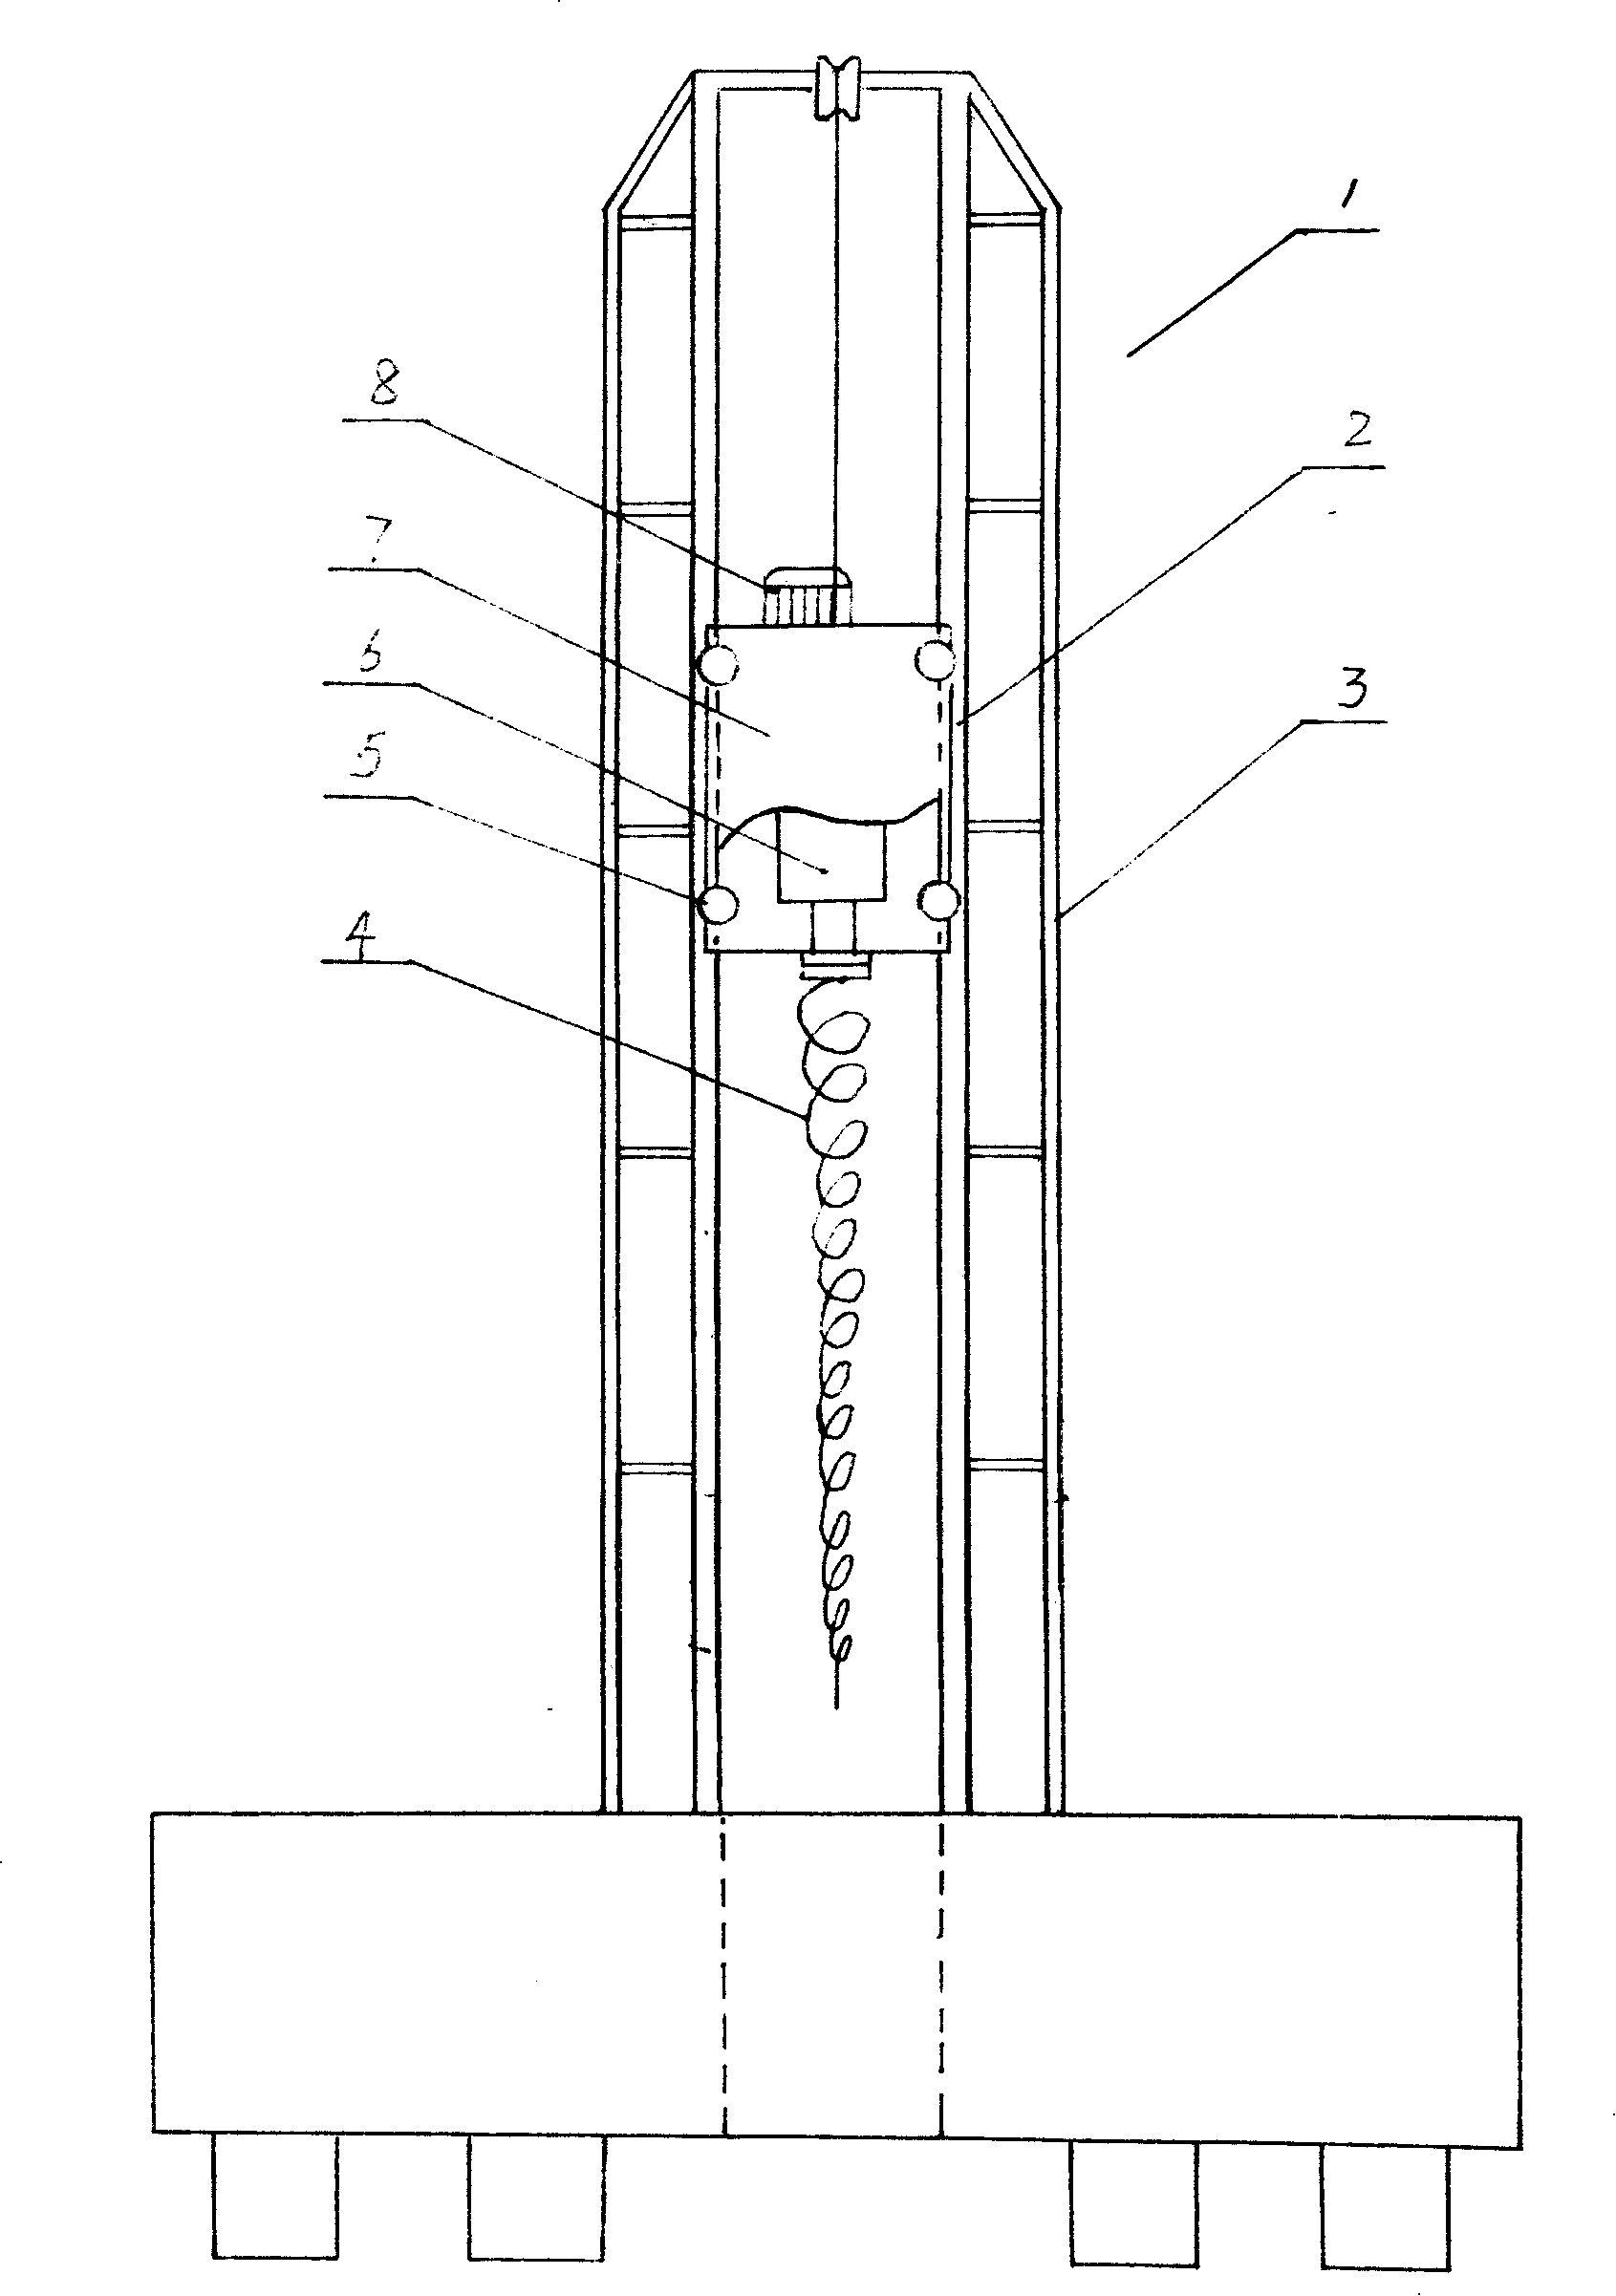 Pile machine having drilling function and drilling static pressure method